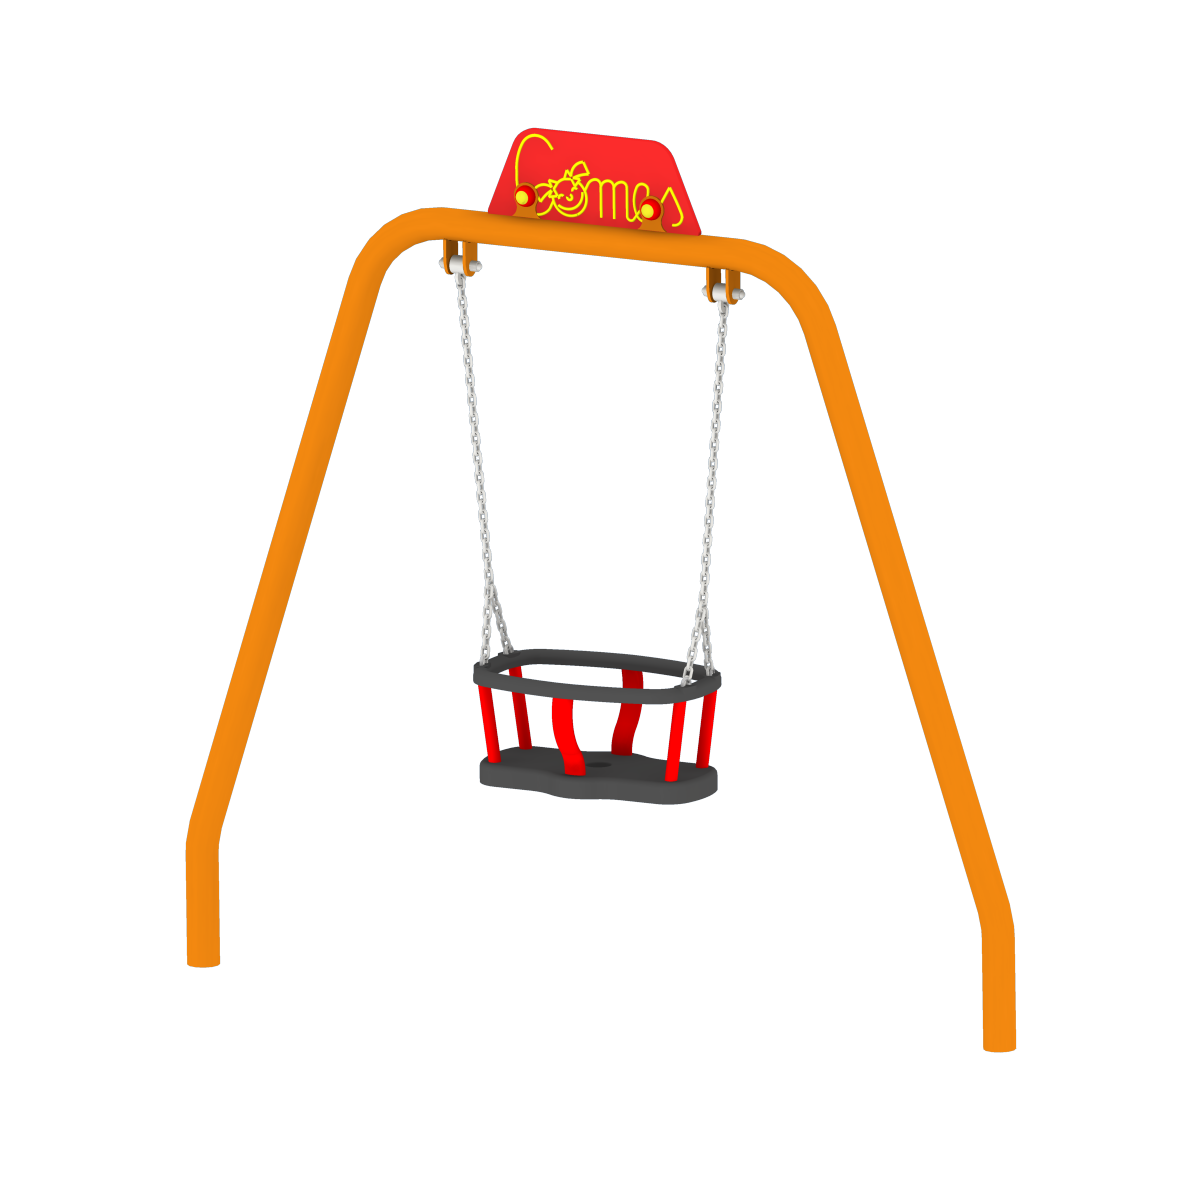 A swing for small children on the playground.